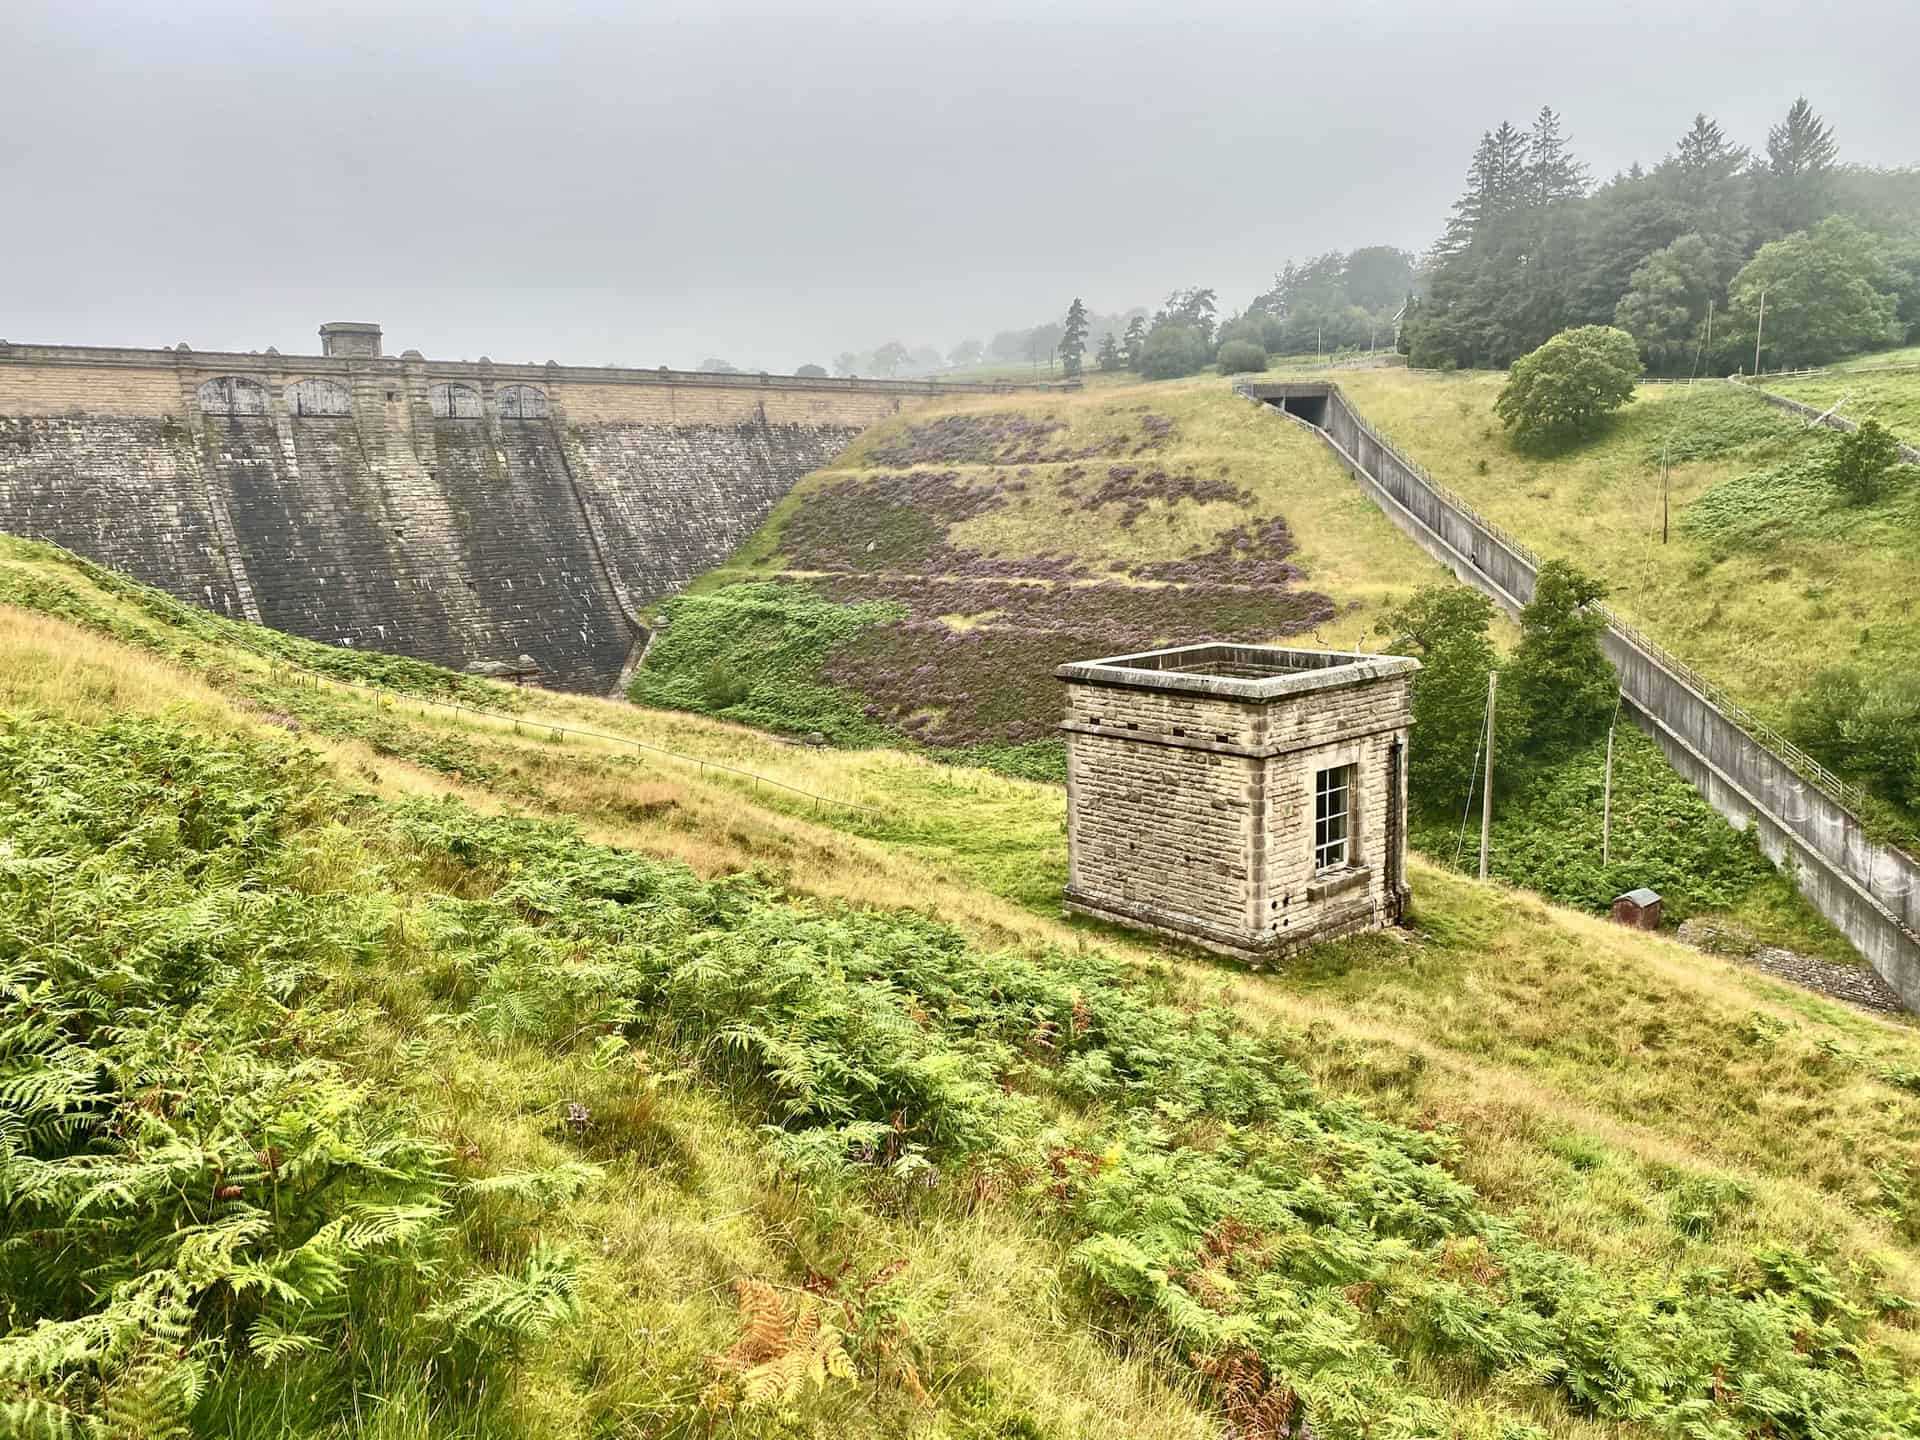 The majestic Roundhill Reservoir dam is a testament to engineering.